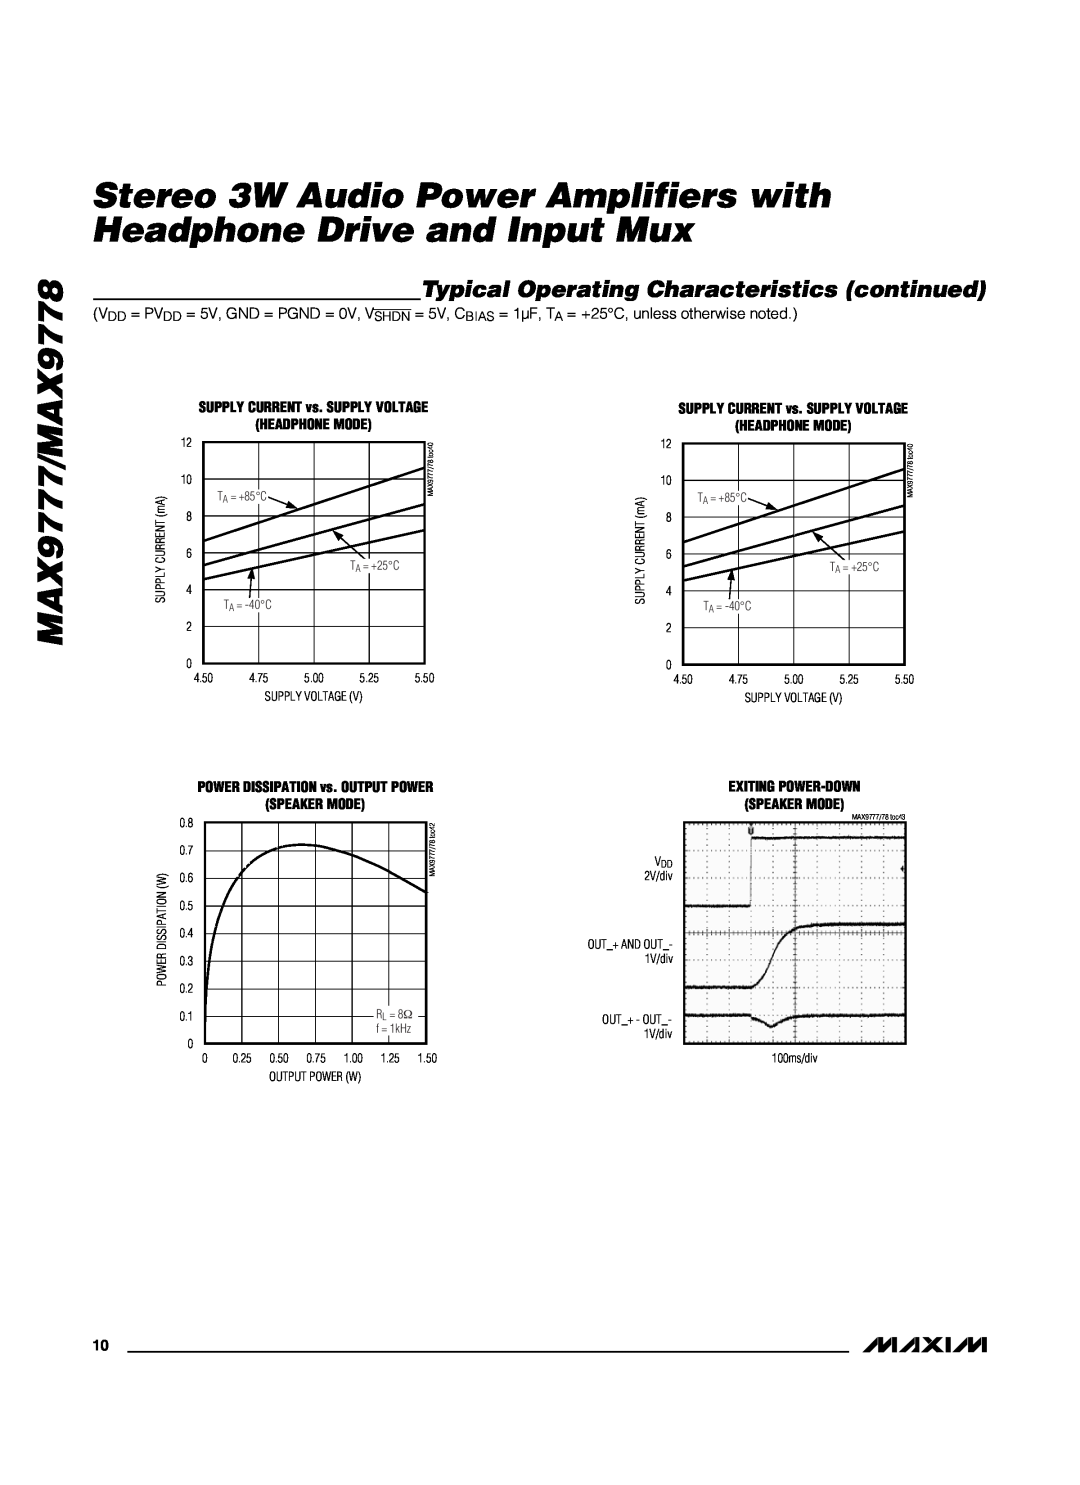 Maxim MAX9777/MAX9778, Typical Operating Characteristics continued, SUPPLY CURRENT vs. SUPPLY VOLTAGE HEADPHONE MODE 